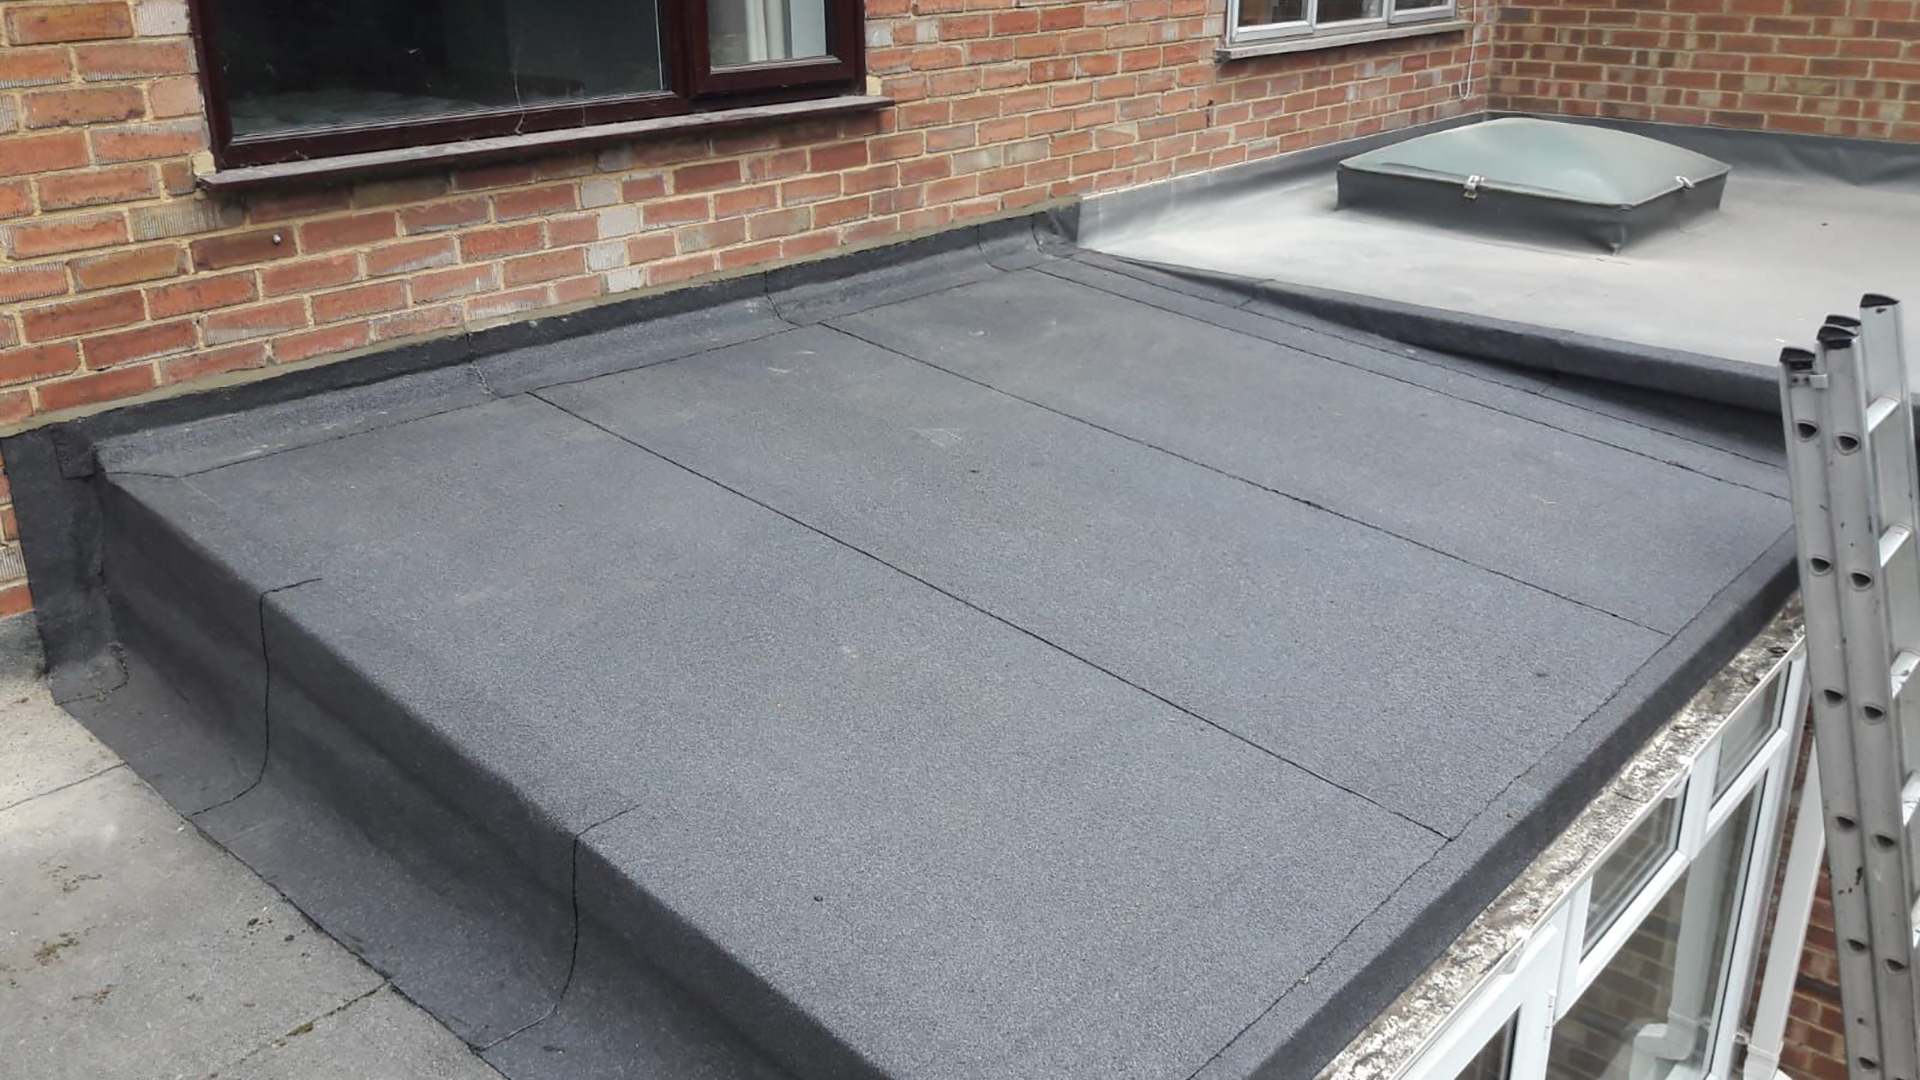 Flat Roof Repairs Ipswich | Flat Roofing & Gutter Cleaning Services, contact us